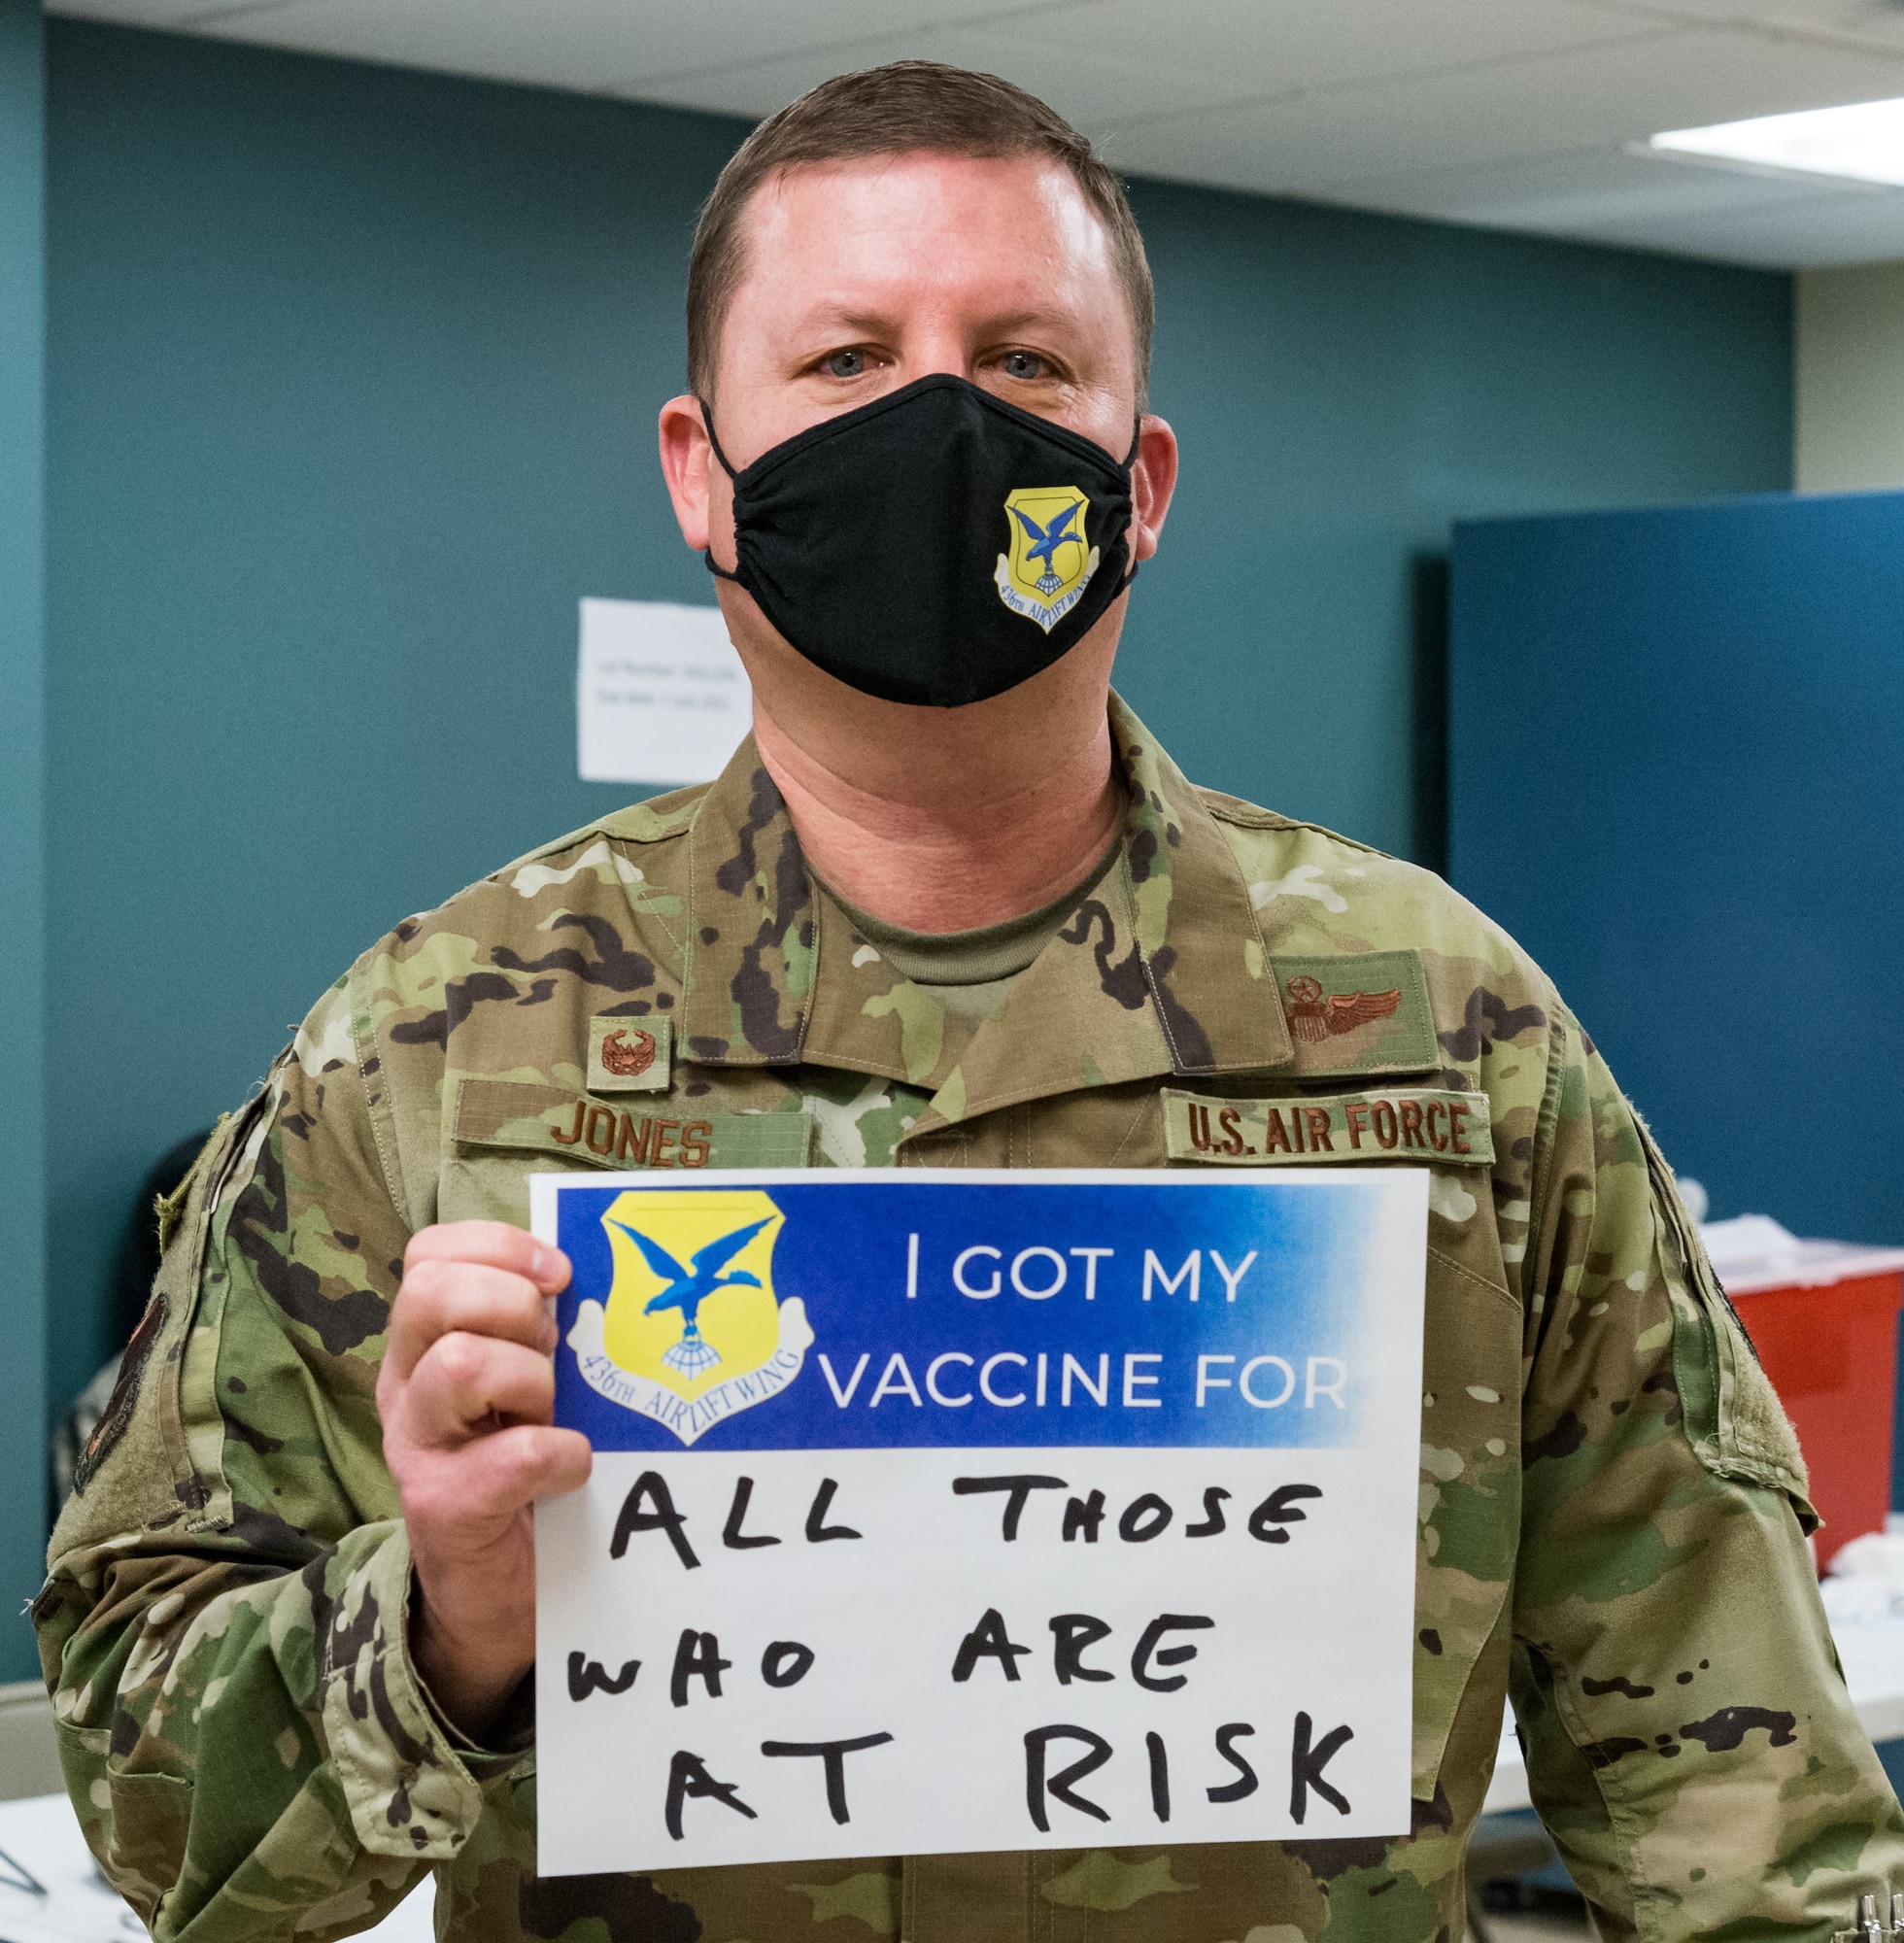 Col. Matthew Jones, 436th Airlift Wing commander, displays a sign stating why he volunteered for the COVID-19 vaccine Jan. 22, 2021, at Dover Air Force Base, Delaware. Jones was among the first Team Dover senior leaders who voluntarily received the vaccine in accordance with Department of Defense guidance. The vaccine was granted emergency use authorization by the U.S. Food and Drug Administration for use in prevention of COVID-19. (U.S. Air Force photo by Roland Balik)